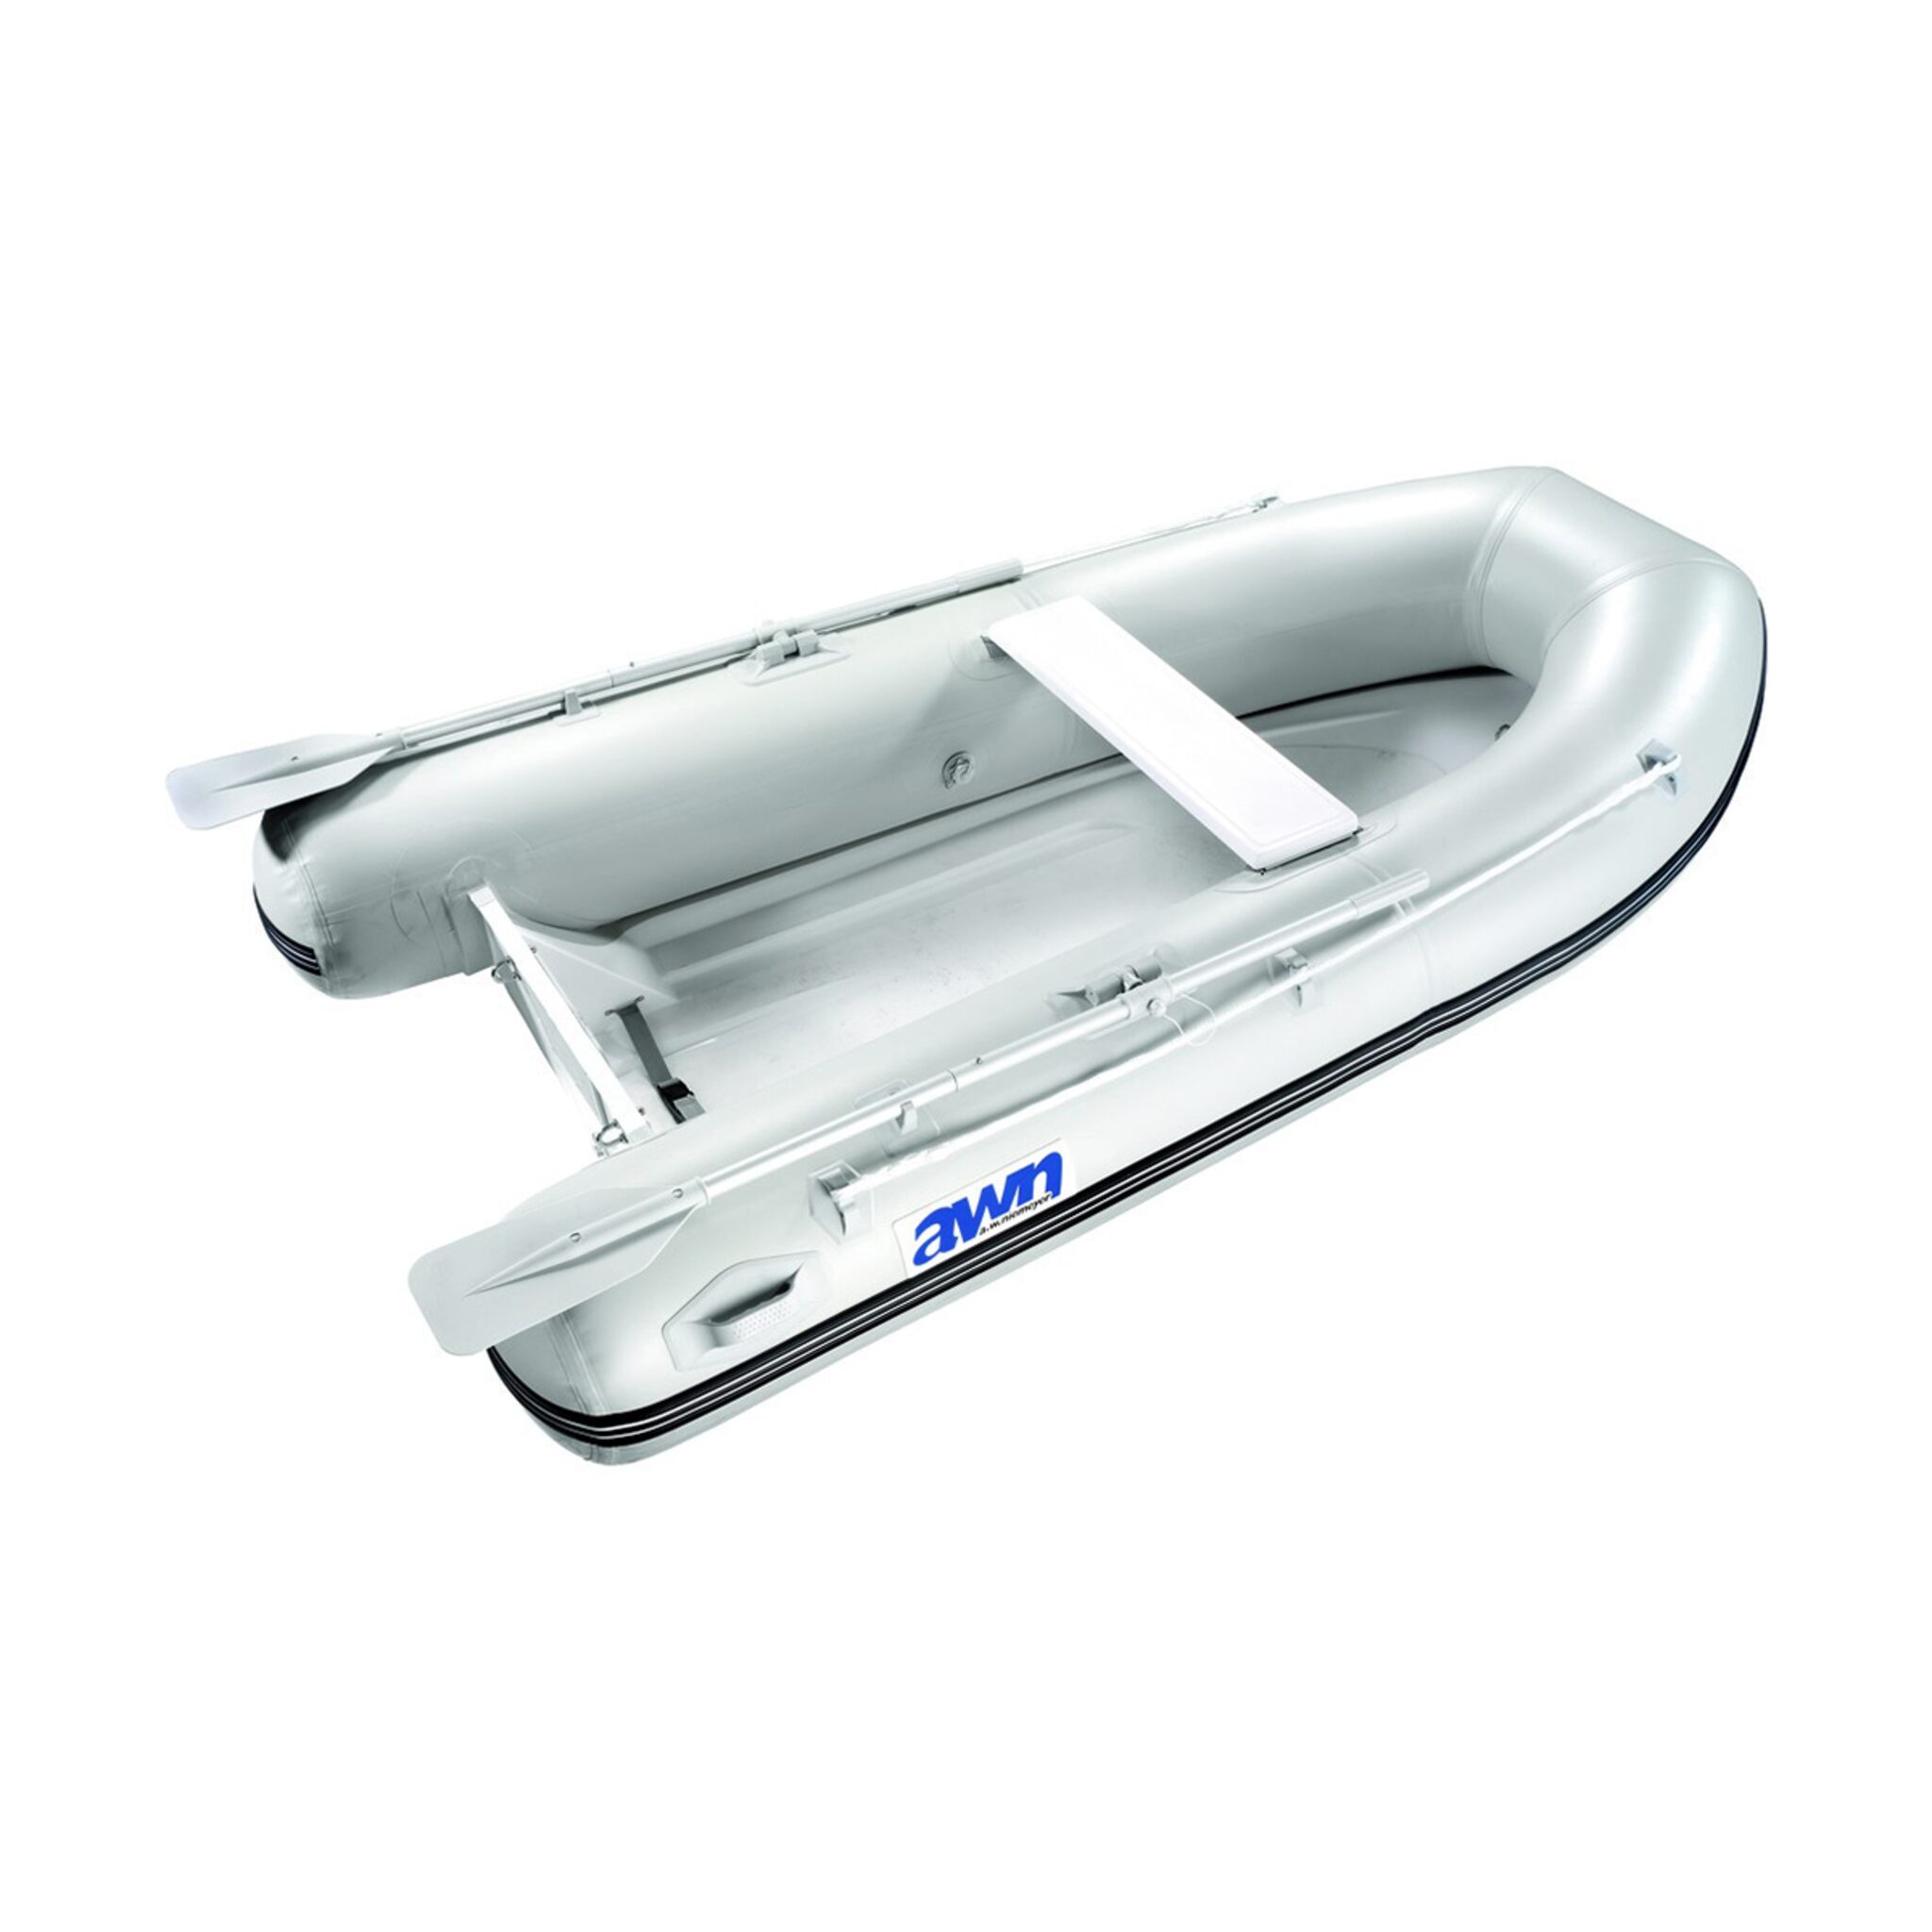 awn inflatable boat RIB 220 with fixed hull bottom